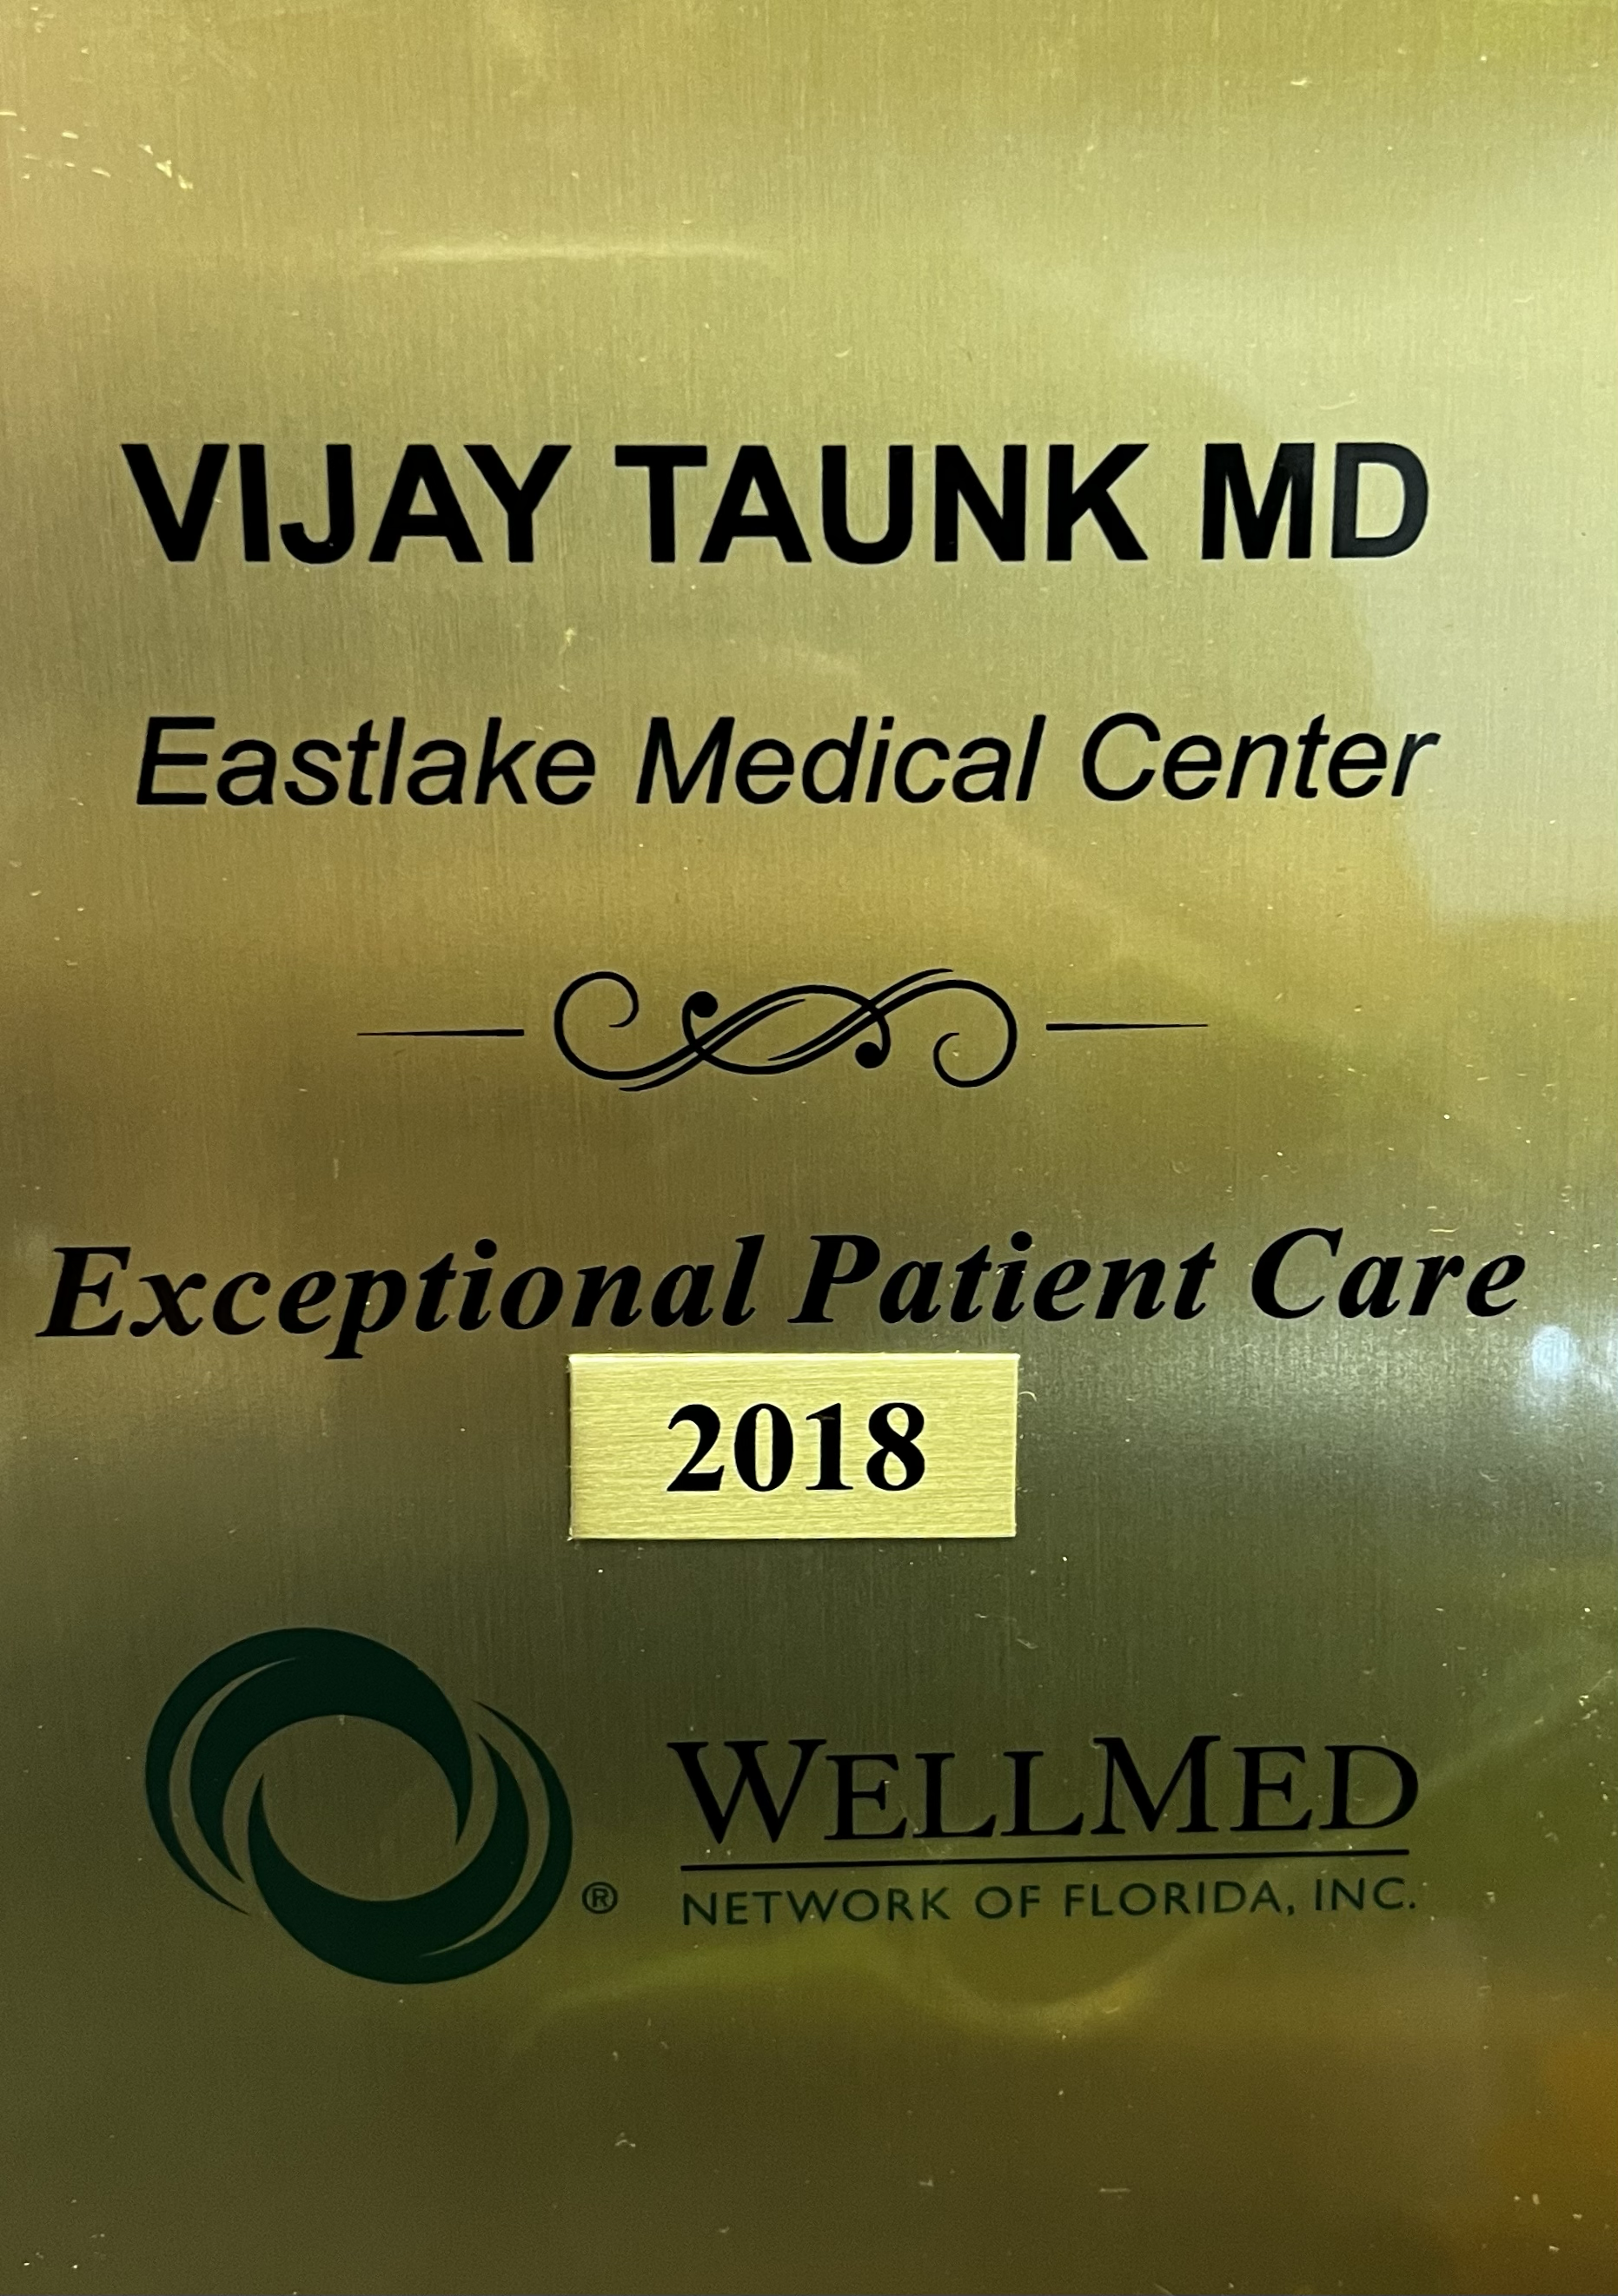 2018 Exceptional Patient Care Award